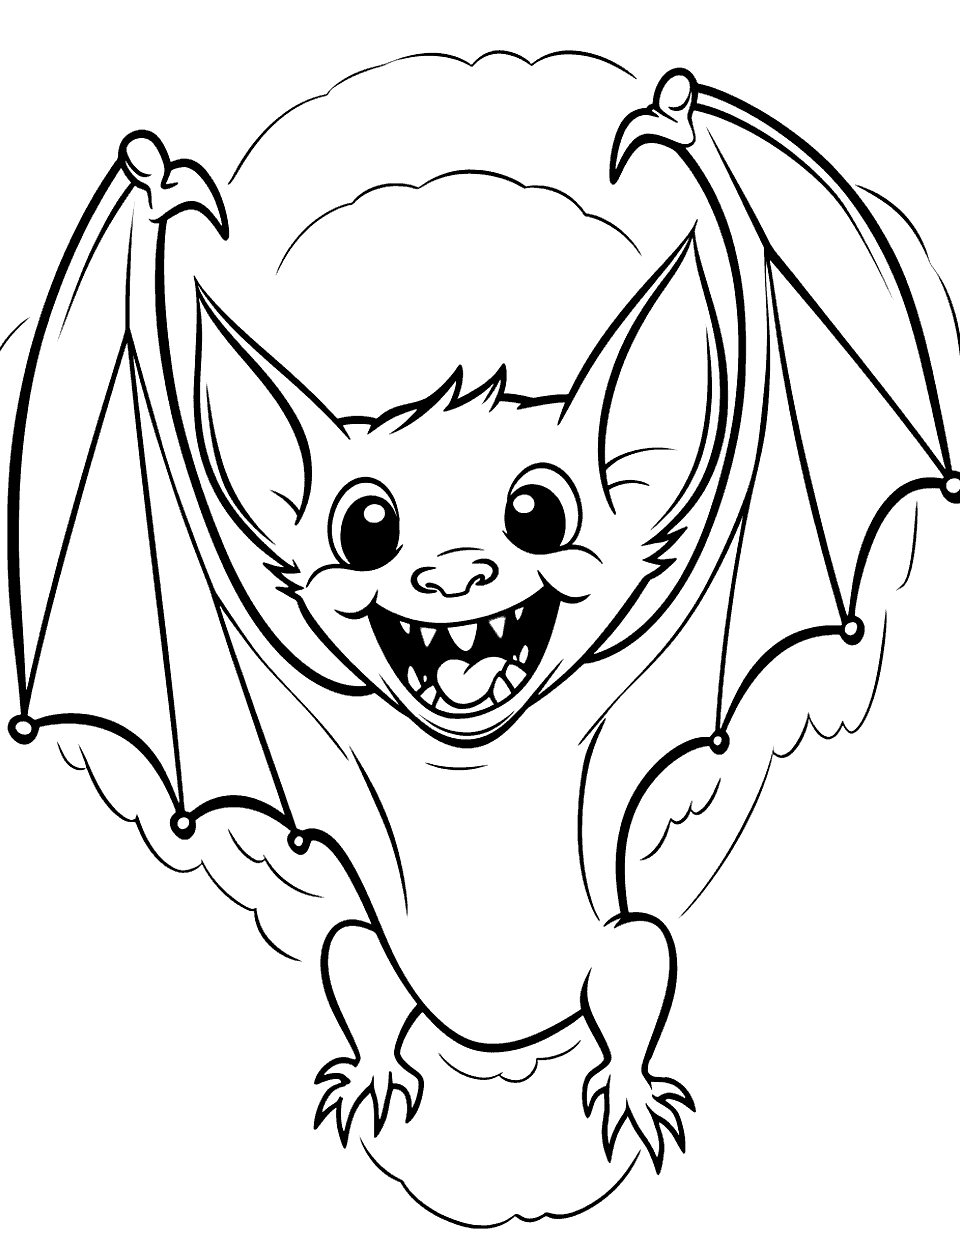 Vampire Bat Ready to Feed Coloring Page - A vampire bat with open wings and mouth, showing tiny teeth.